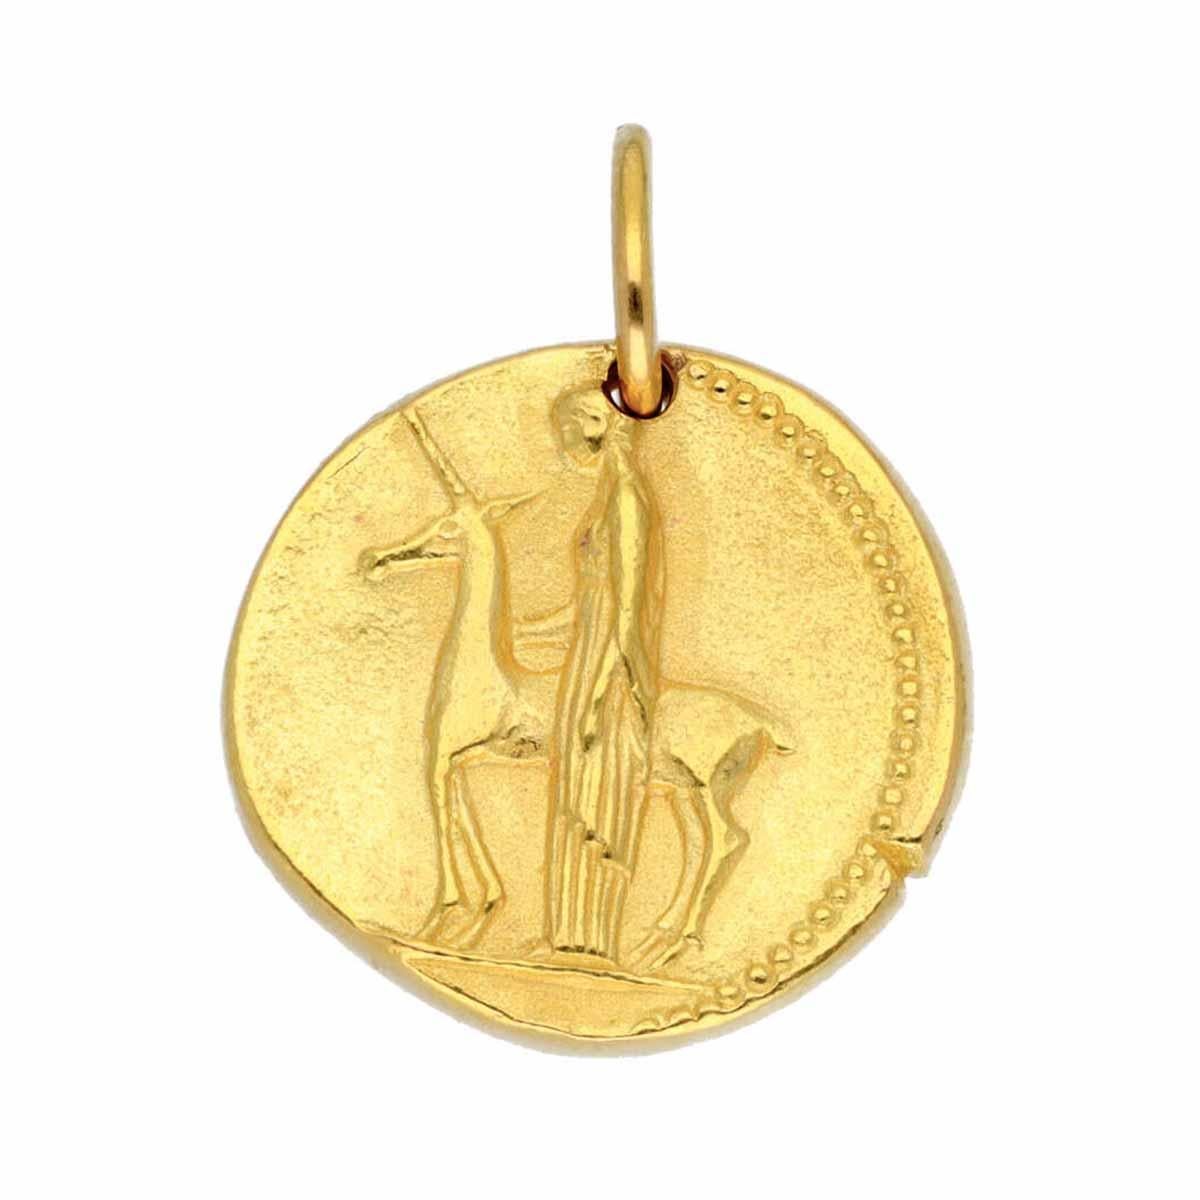 Brand:Van Cleef&Arpels
Name:Zodiac Mini Medal Charm Virgo
Material:750 K18 YG Yellow Gold
Weight: 6.7g（Approx)	
Size:W0.76in×H0.75in(not including Vatican)xD0.08in（Approx)
Comes with:VCA Pouch, VCA Repair Statement (Jan 2022)